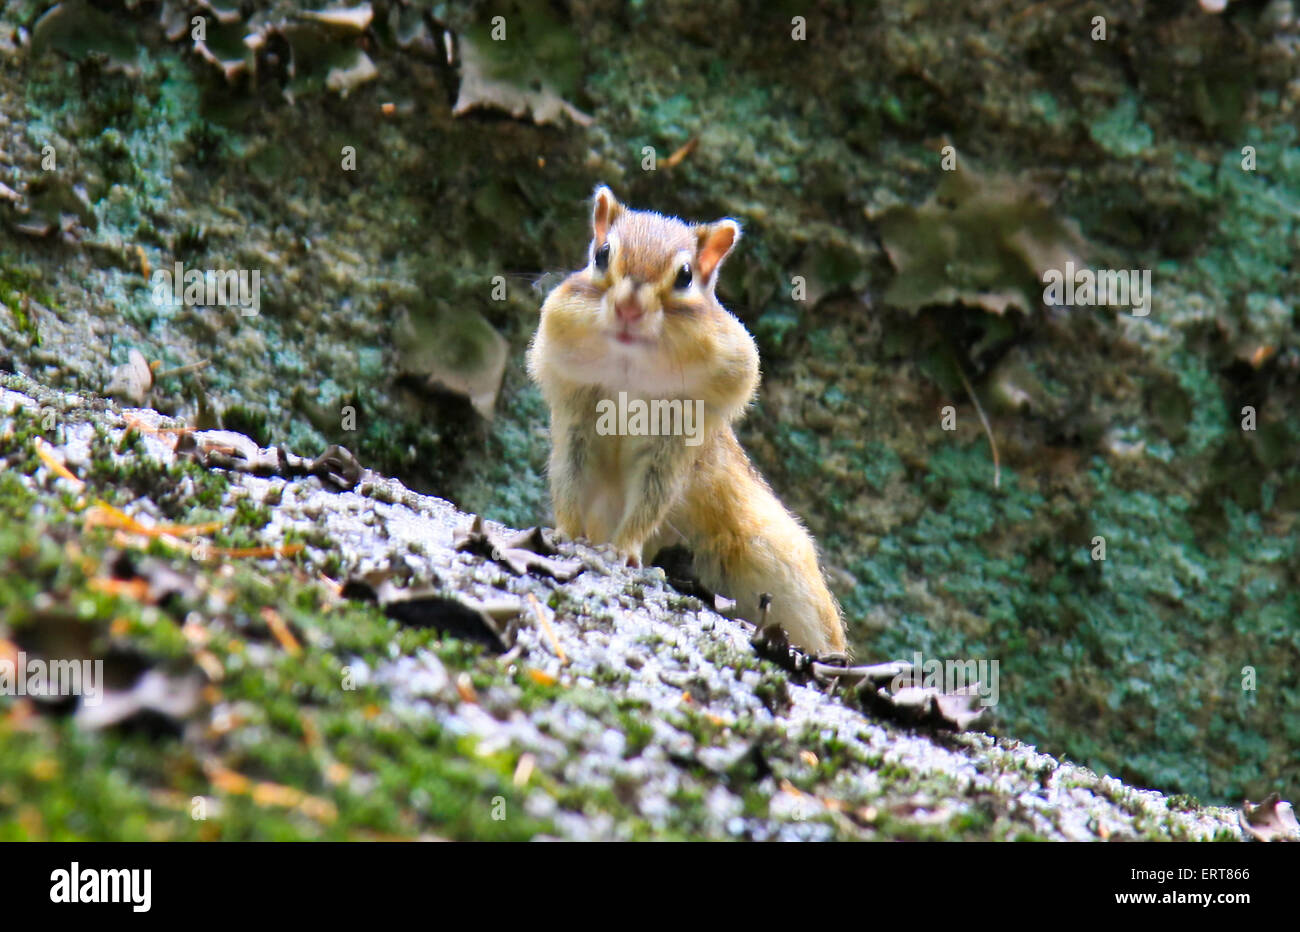 gluttonous small but cute animal - chipmunk Stock Photo